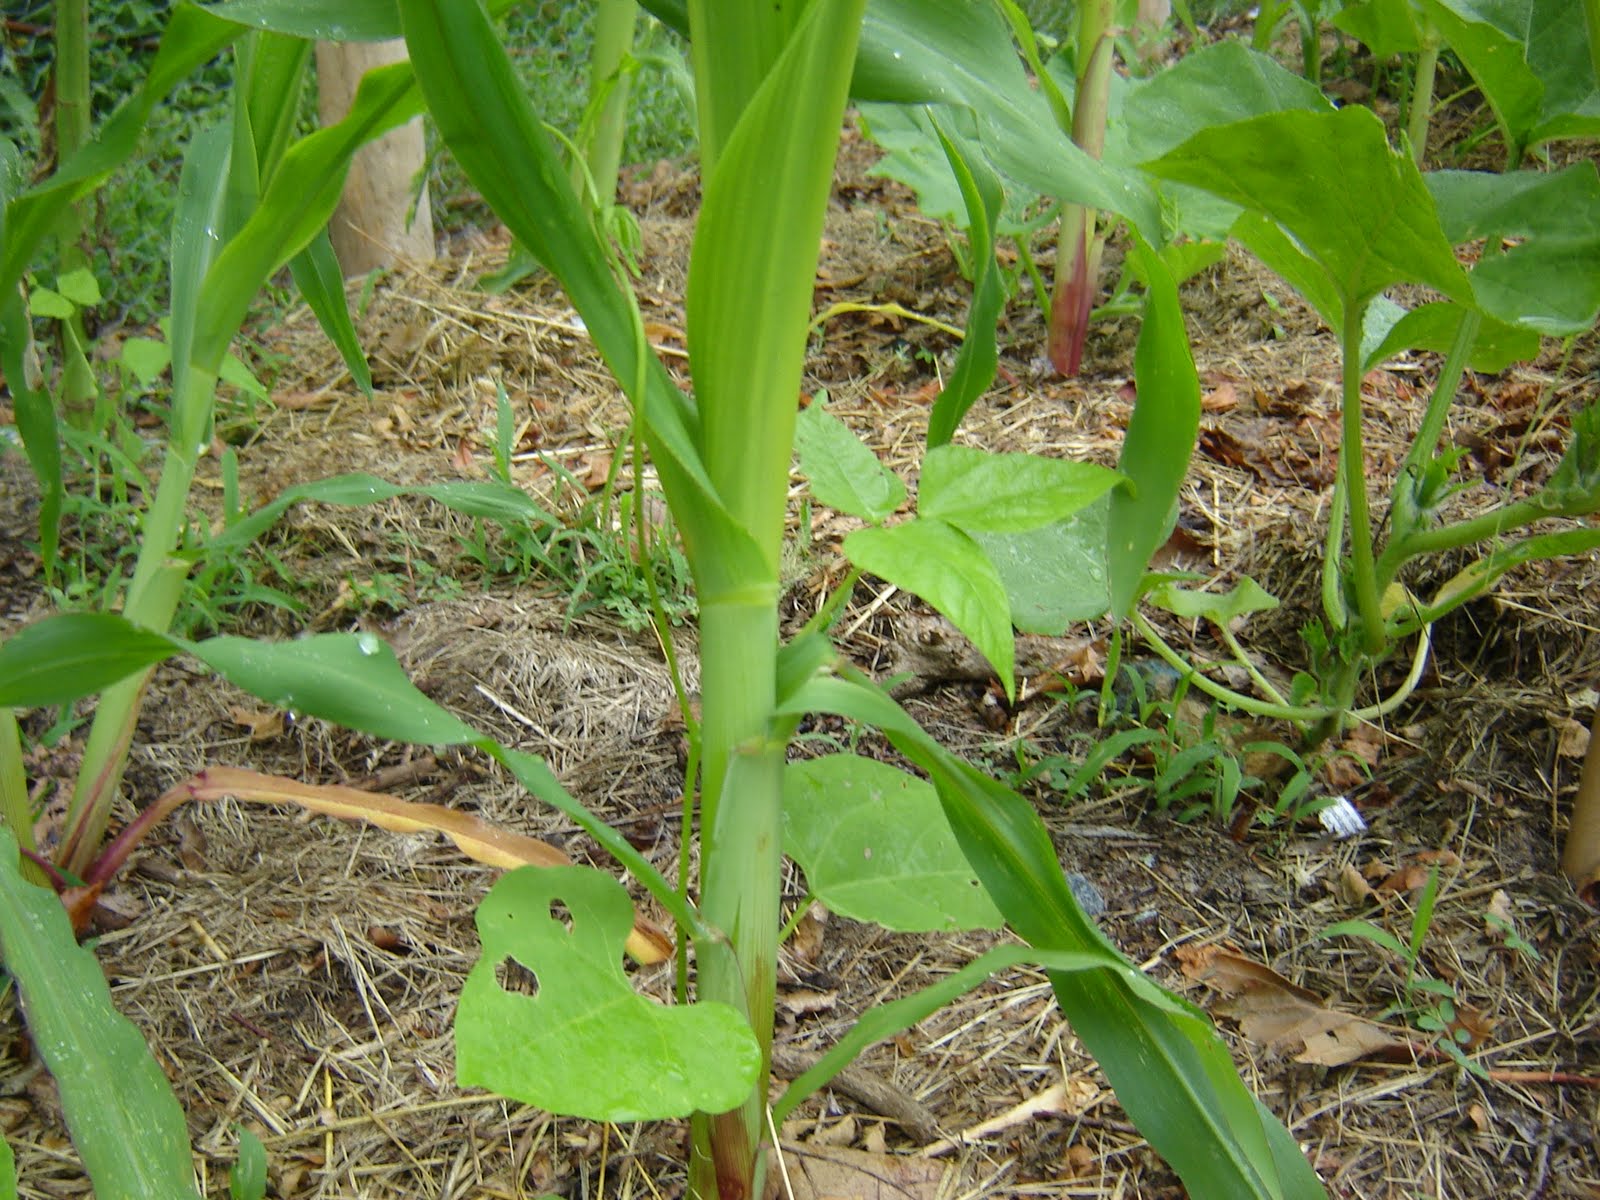 Grow Pole beans and corn together